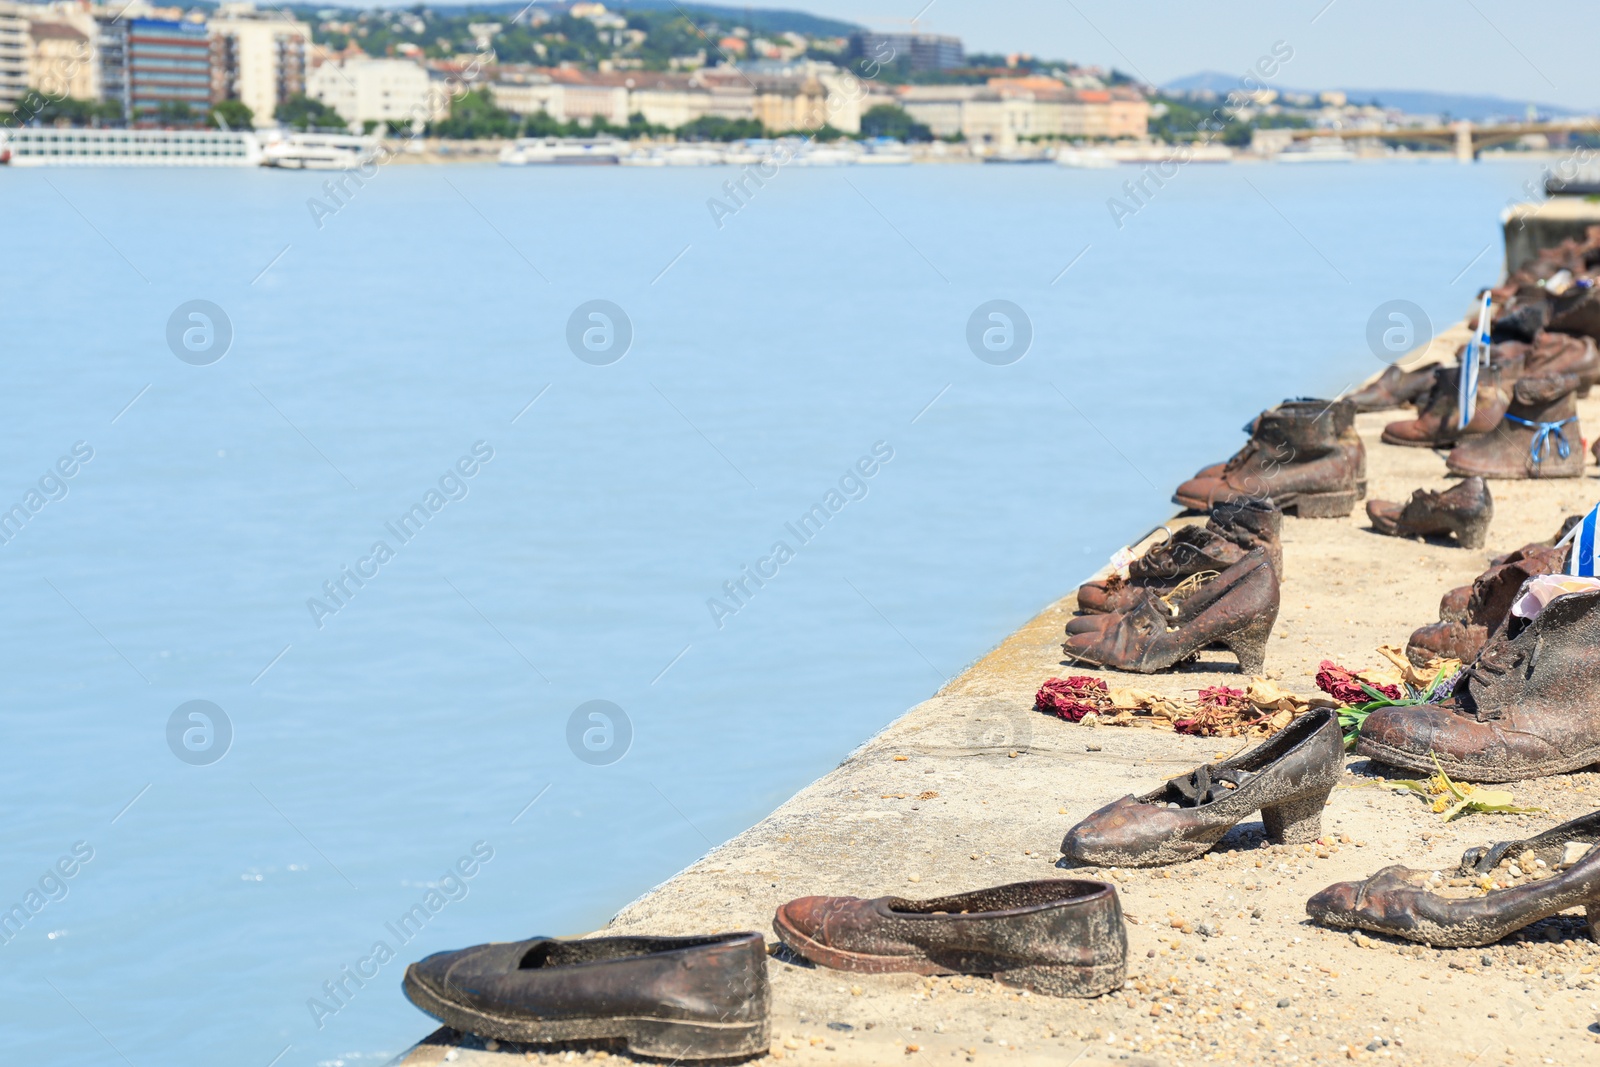 Photo of BUDAPEST, HUNGARY - JUNE 18, 2019: Shoes on Danube Bank